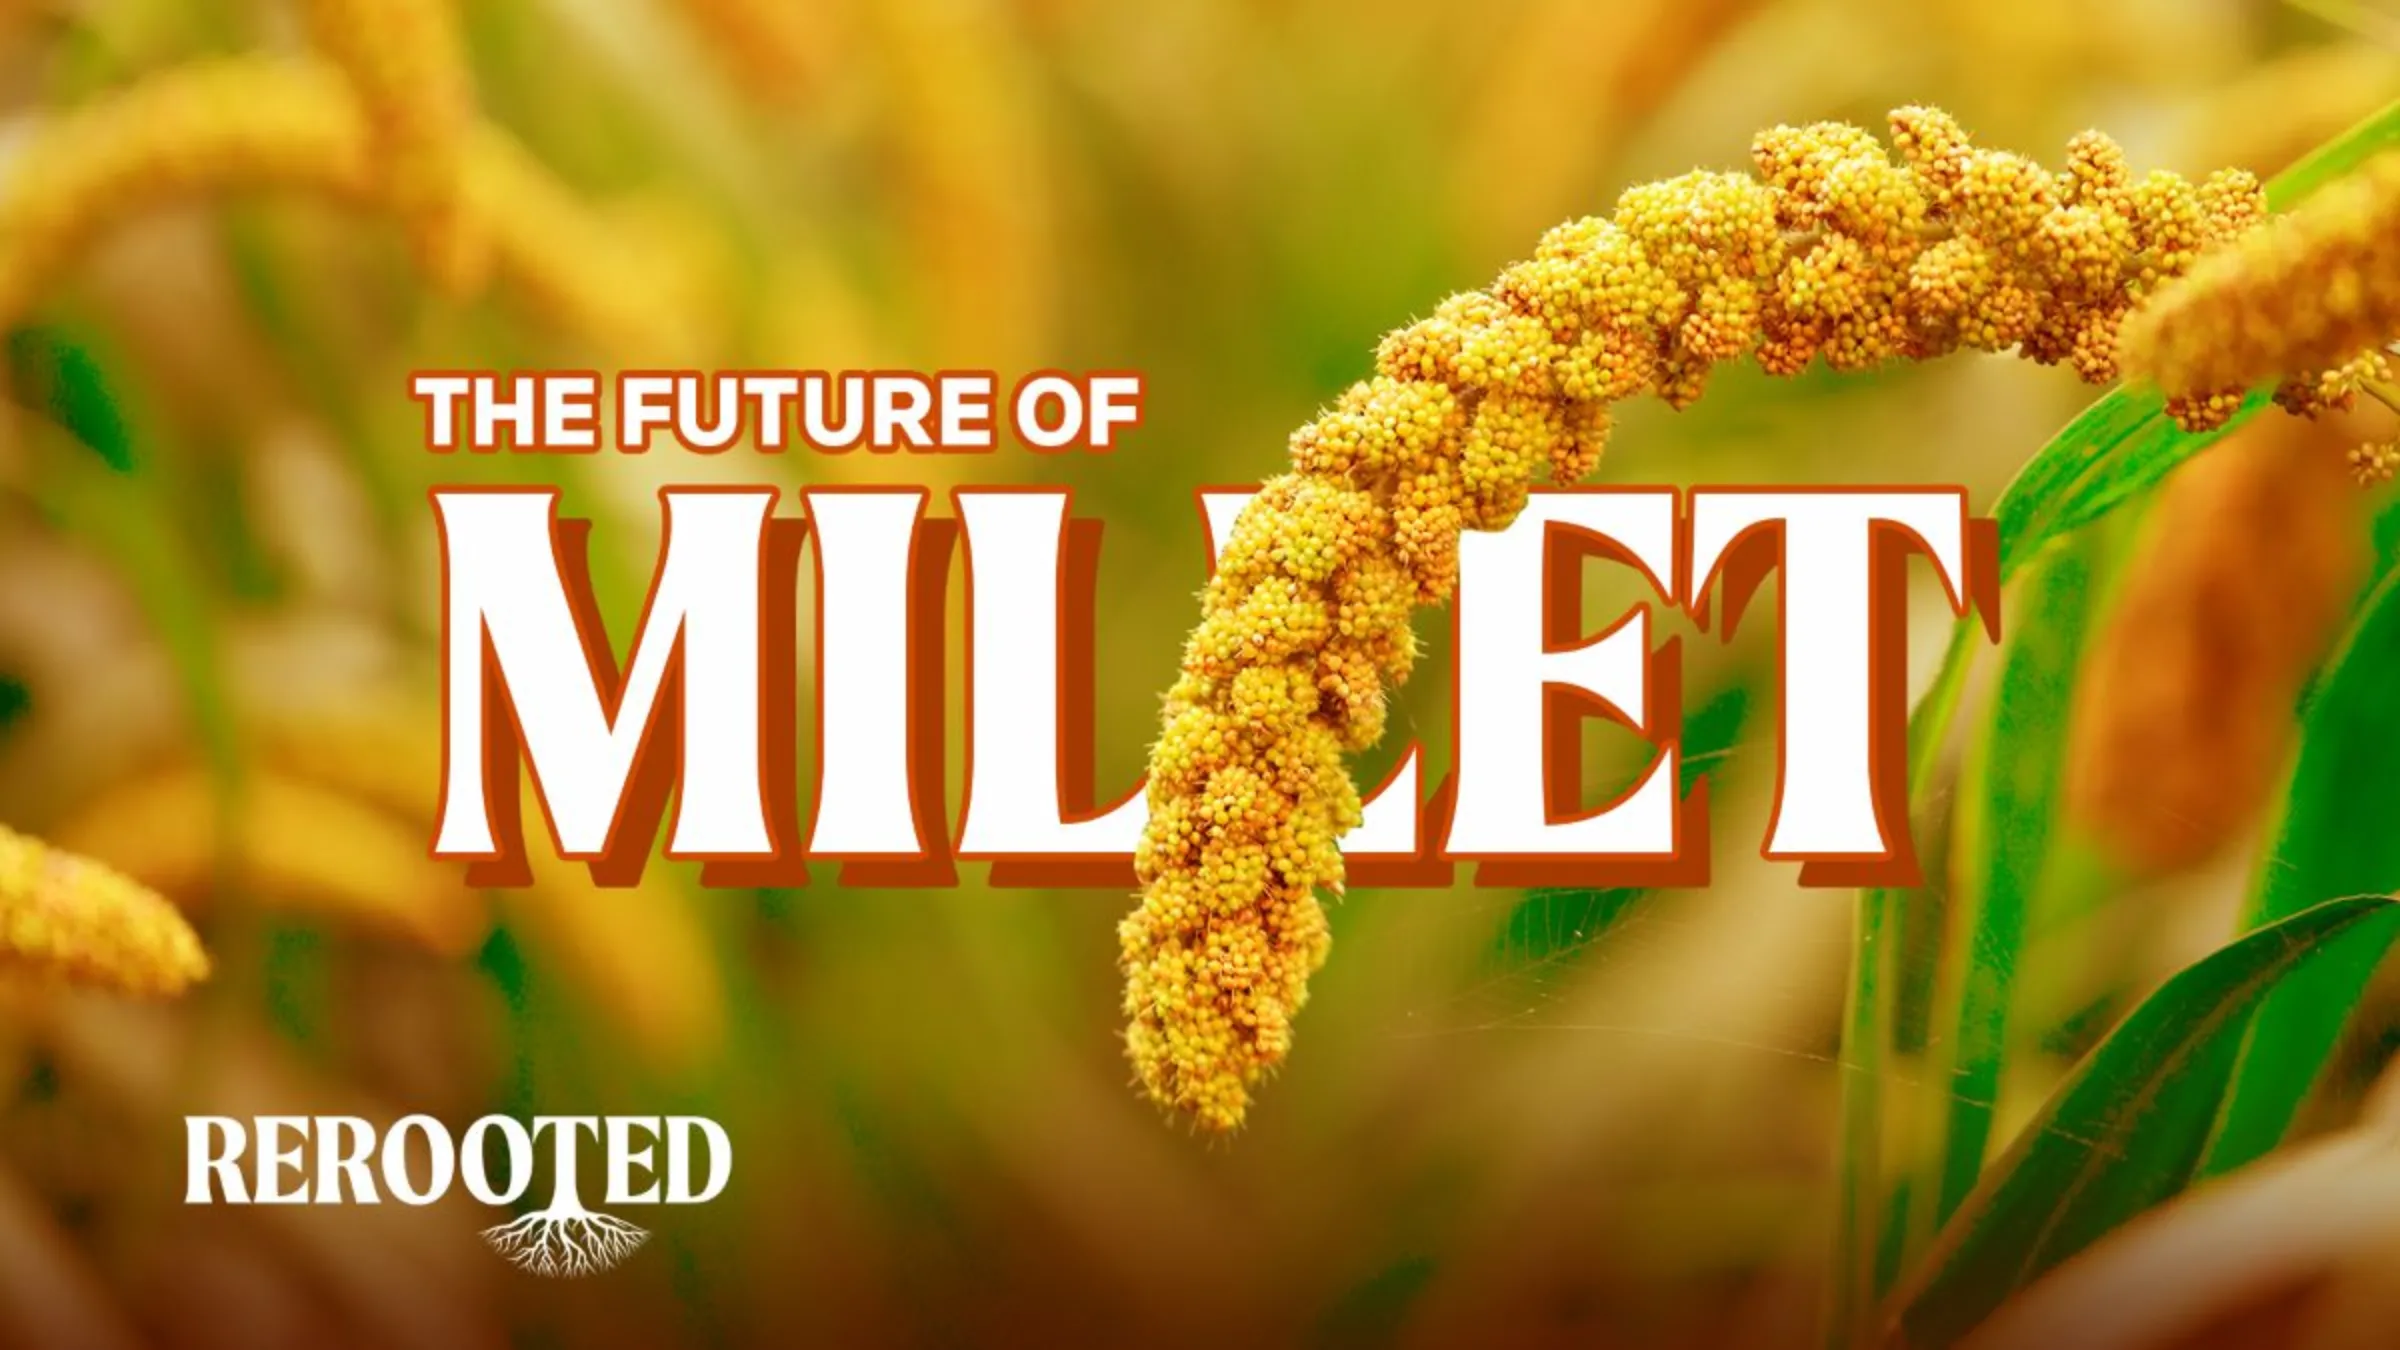 Millet hangs over text reading 'THE FUTURE OF MILLET' in this illustration picture. Thomson Reuters Foundation/Karif Wat